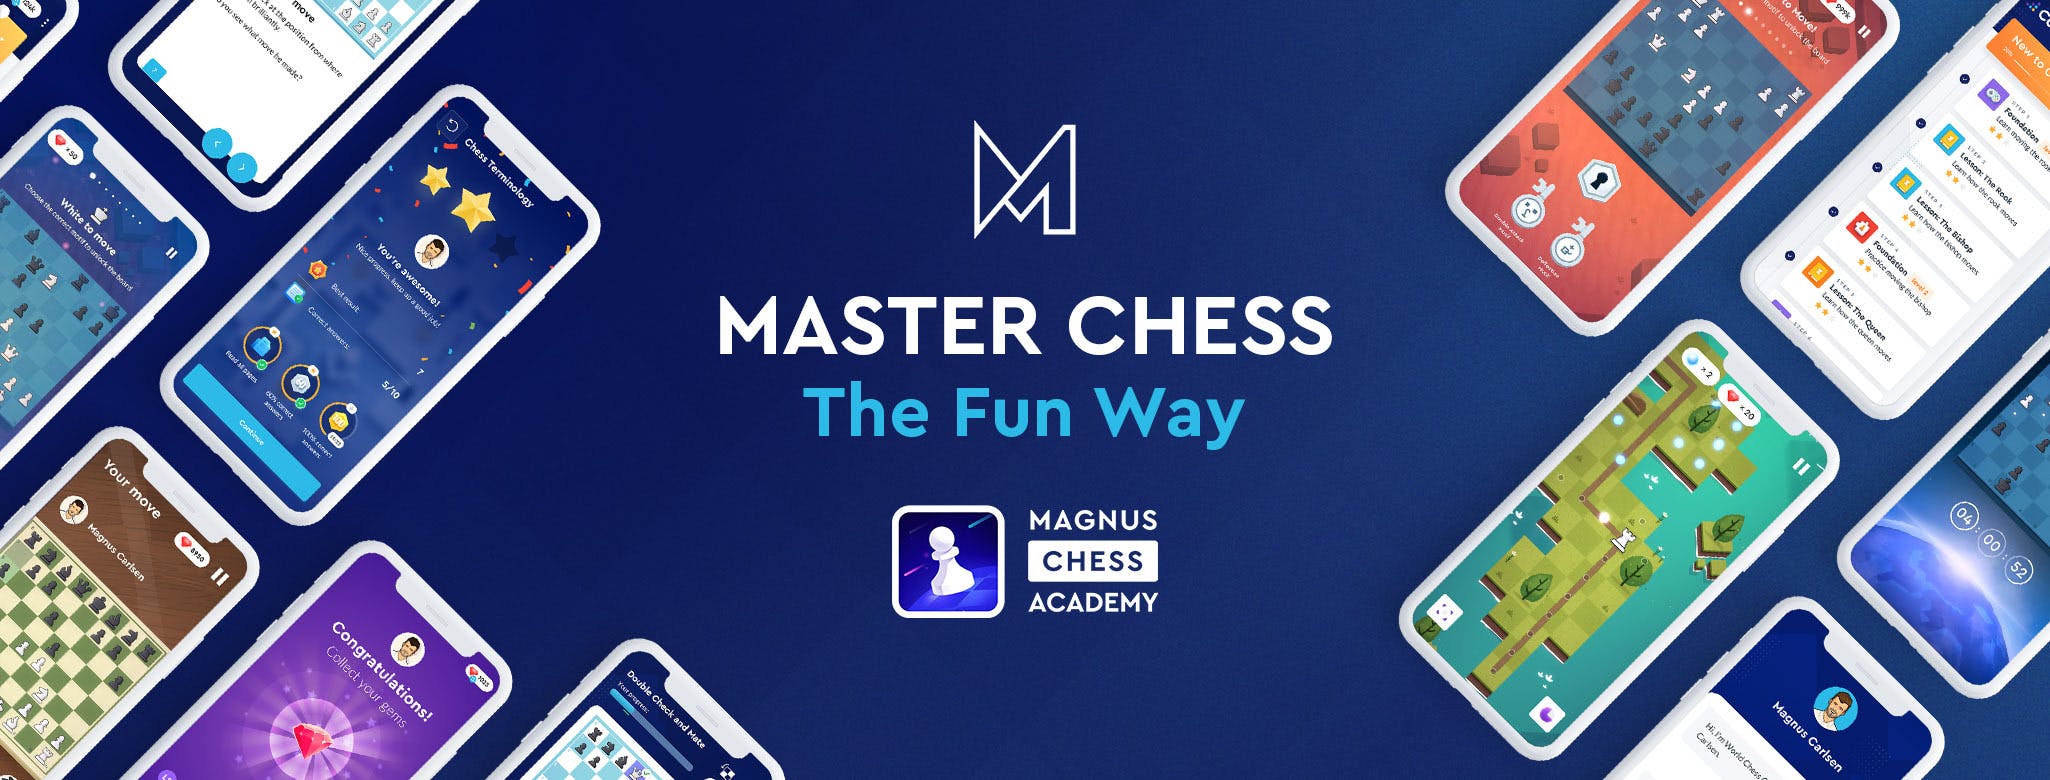 Meet Our Coaches - Magnus Chess Academy (ex Silver Knights)